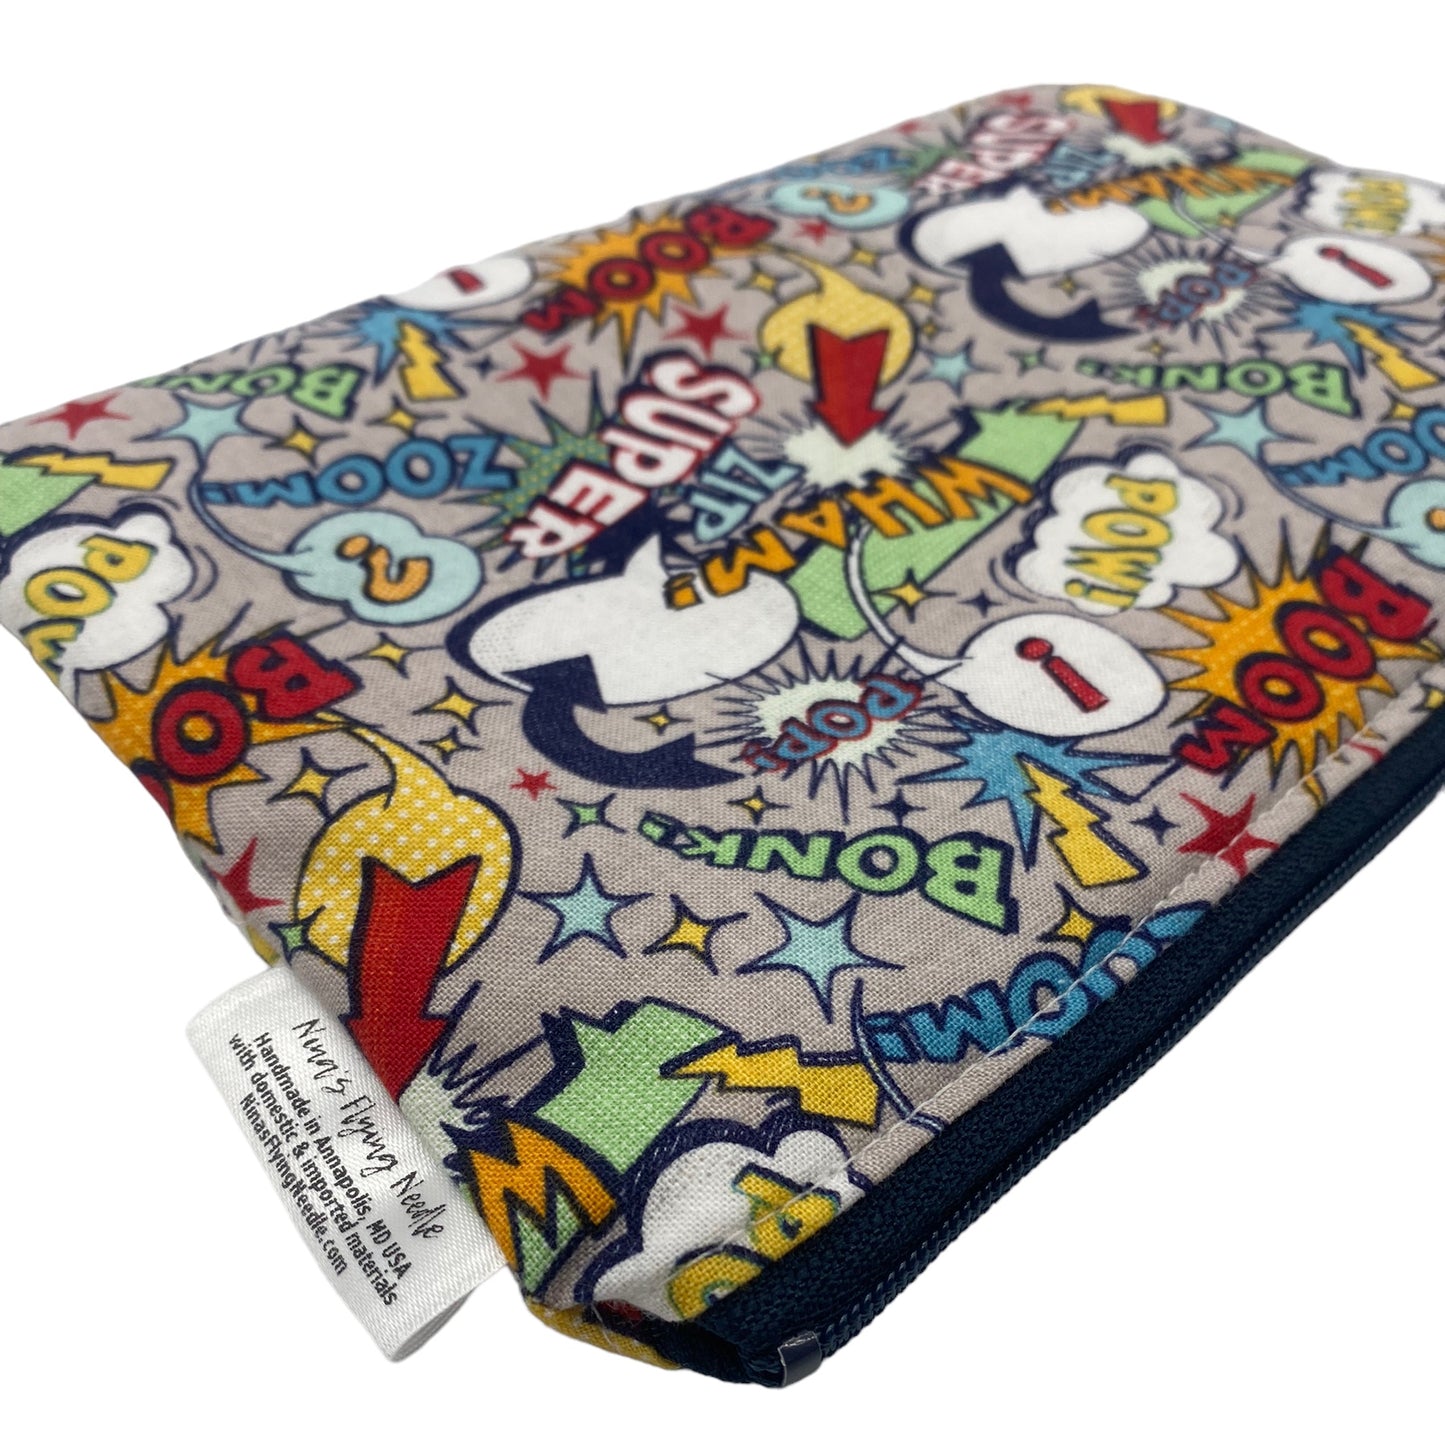 Snack Sized Reusable Zippered Bag Comic Words on Gray